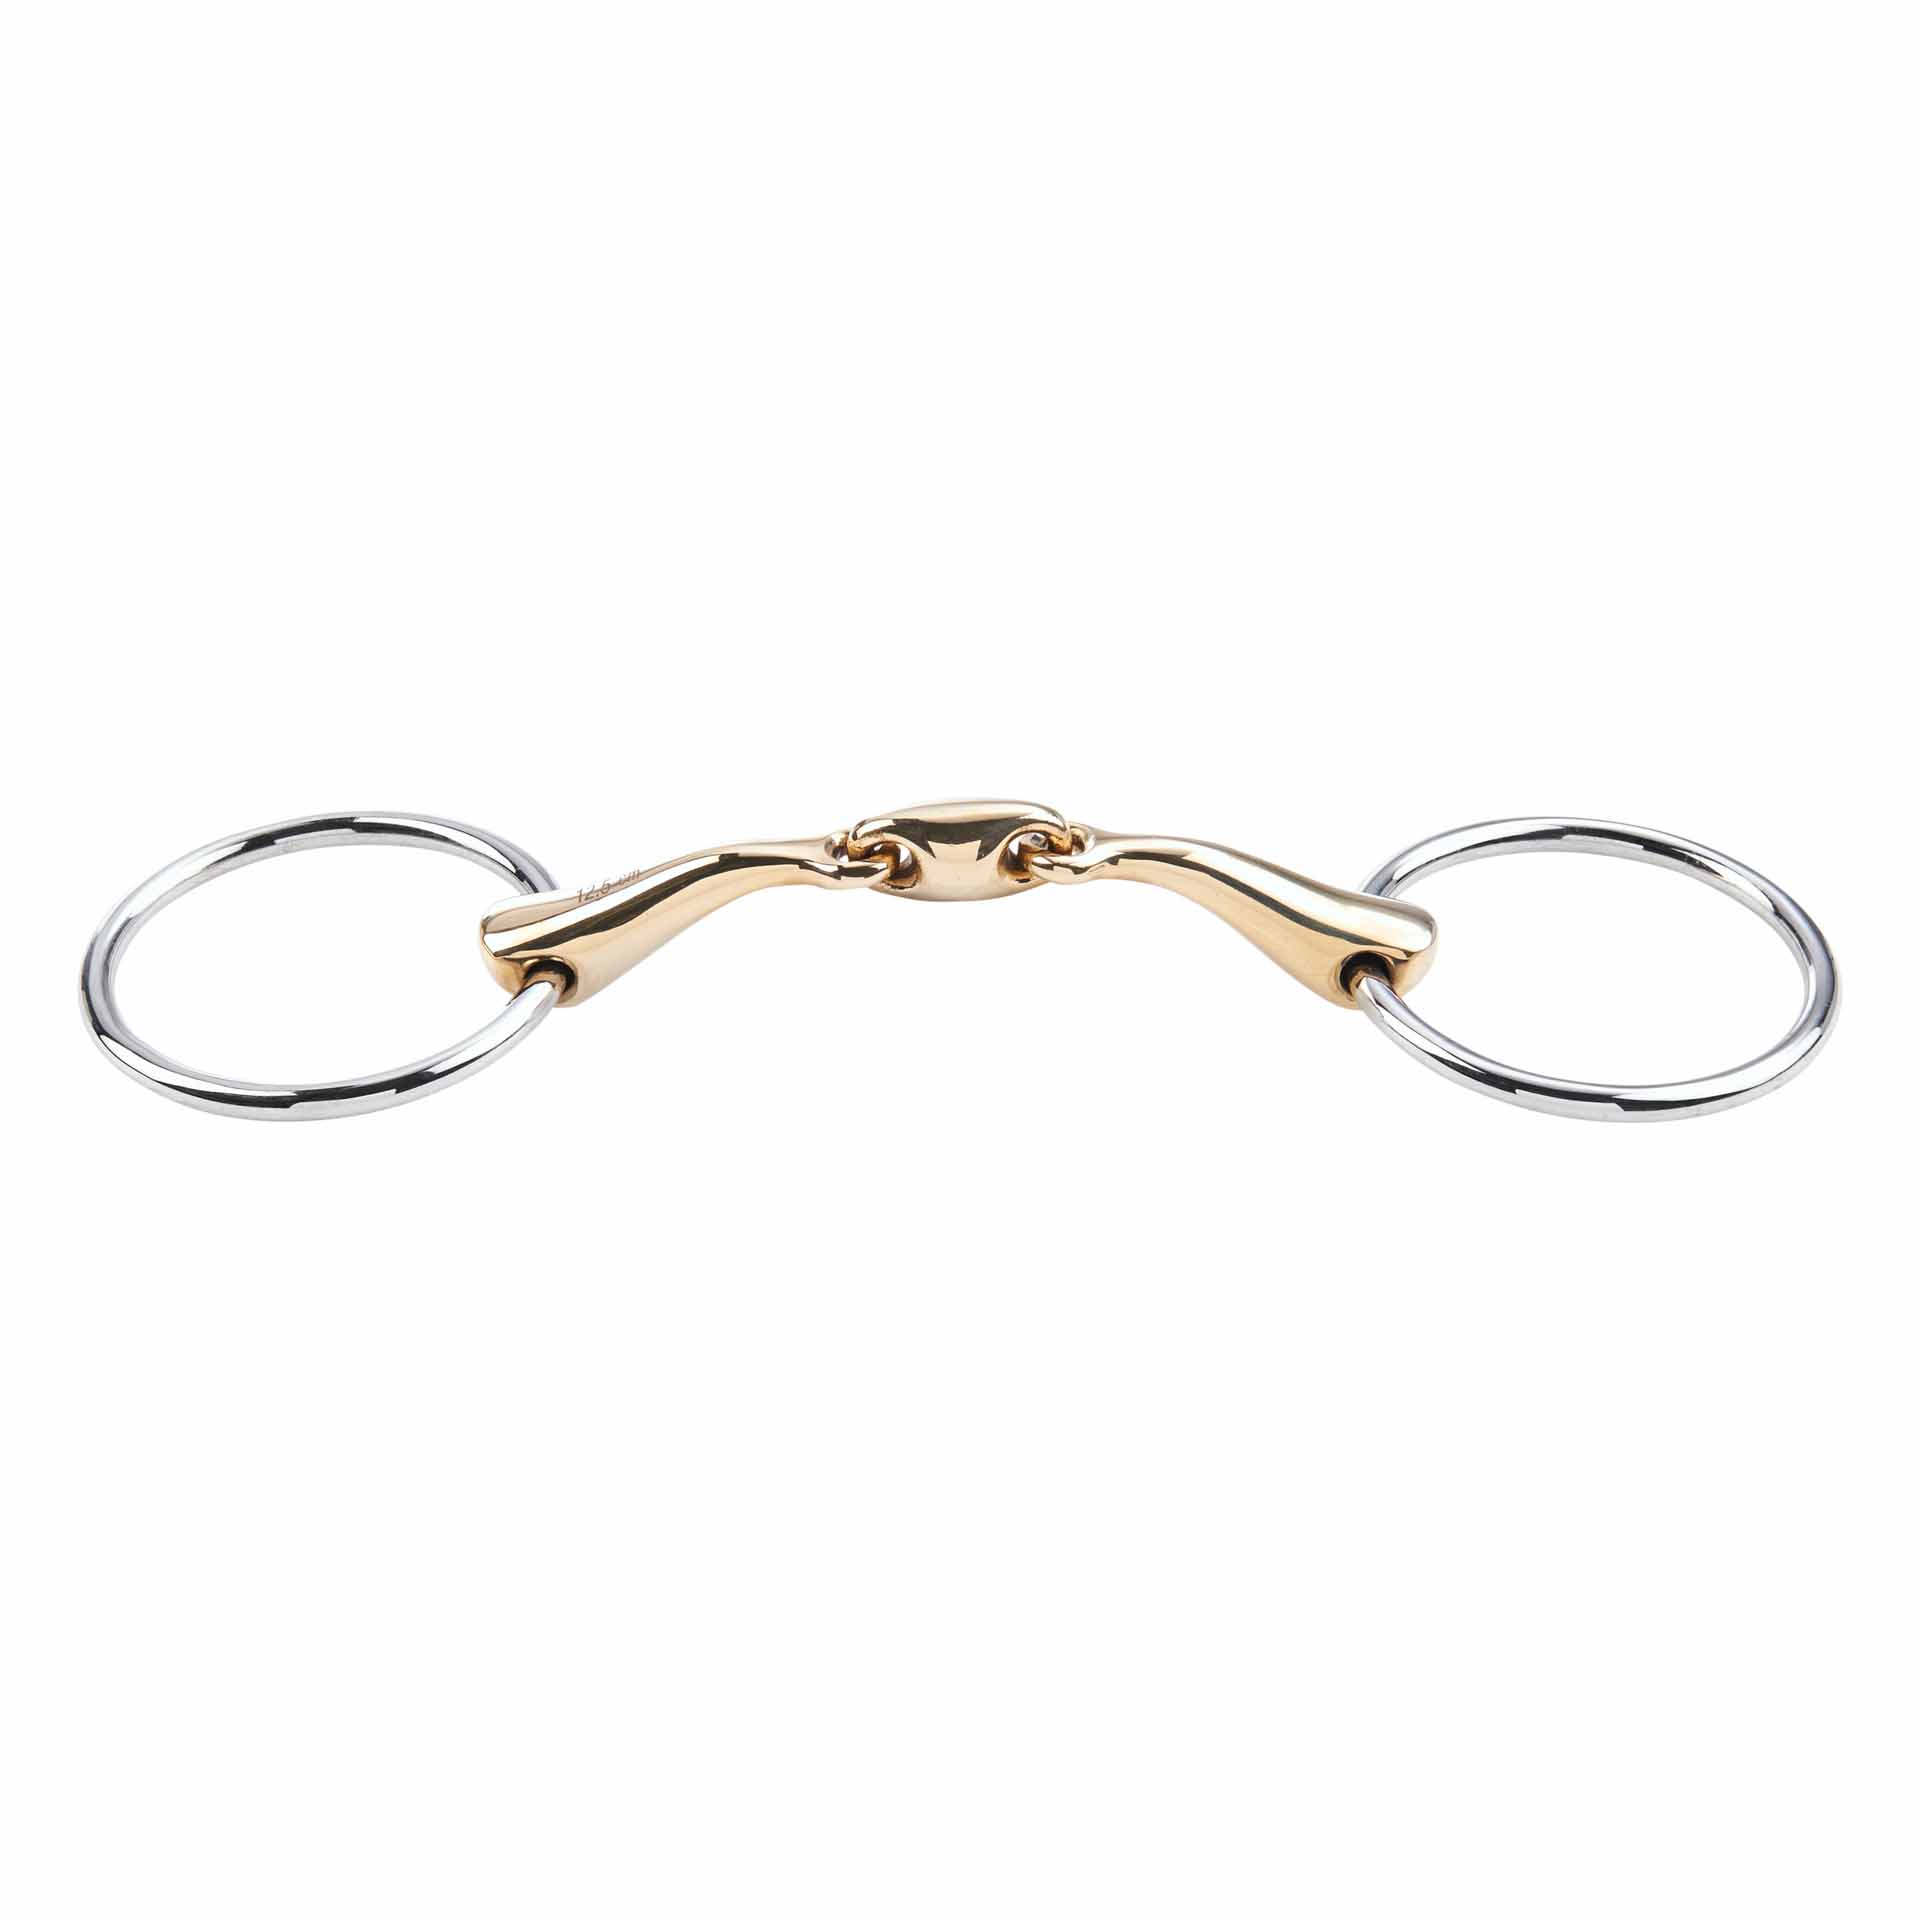 BUSSE Snaffle Bit KAUGAN®-SHAPED 16 mm, French-Link 14.5 cm/65 mm 